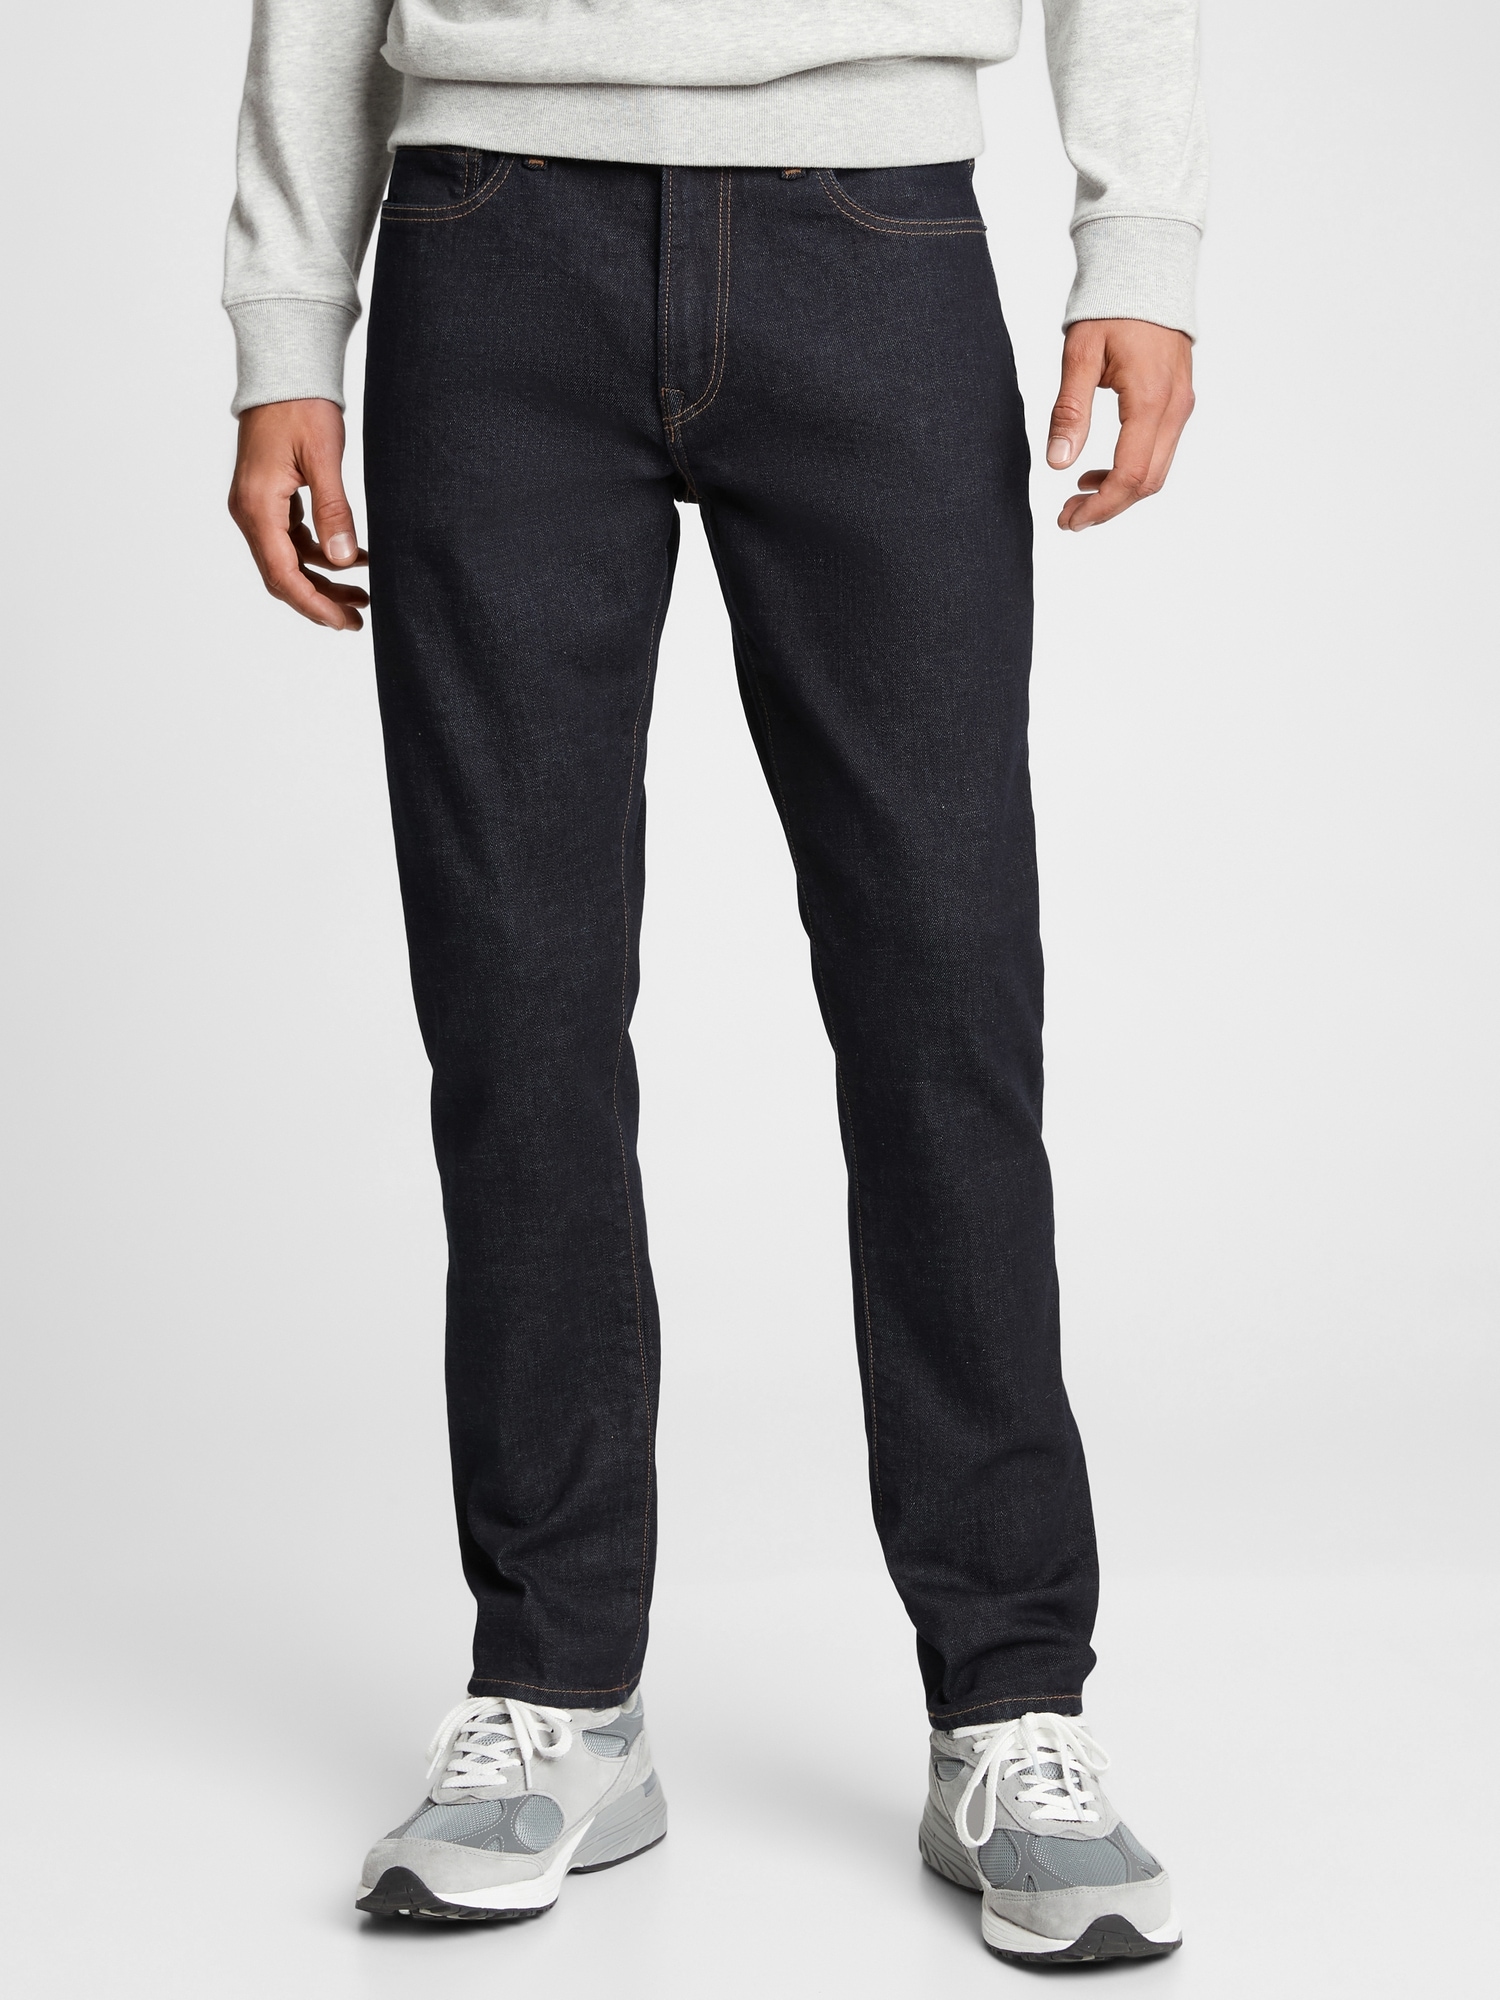 Straight Taper GapFlex Jeans with Washwell | Gap Factory